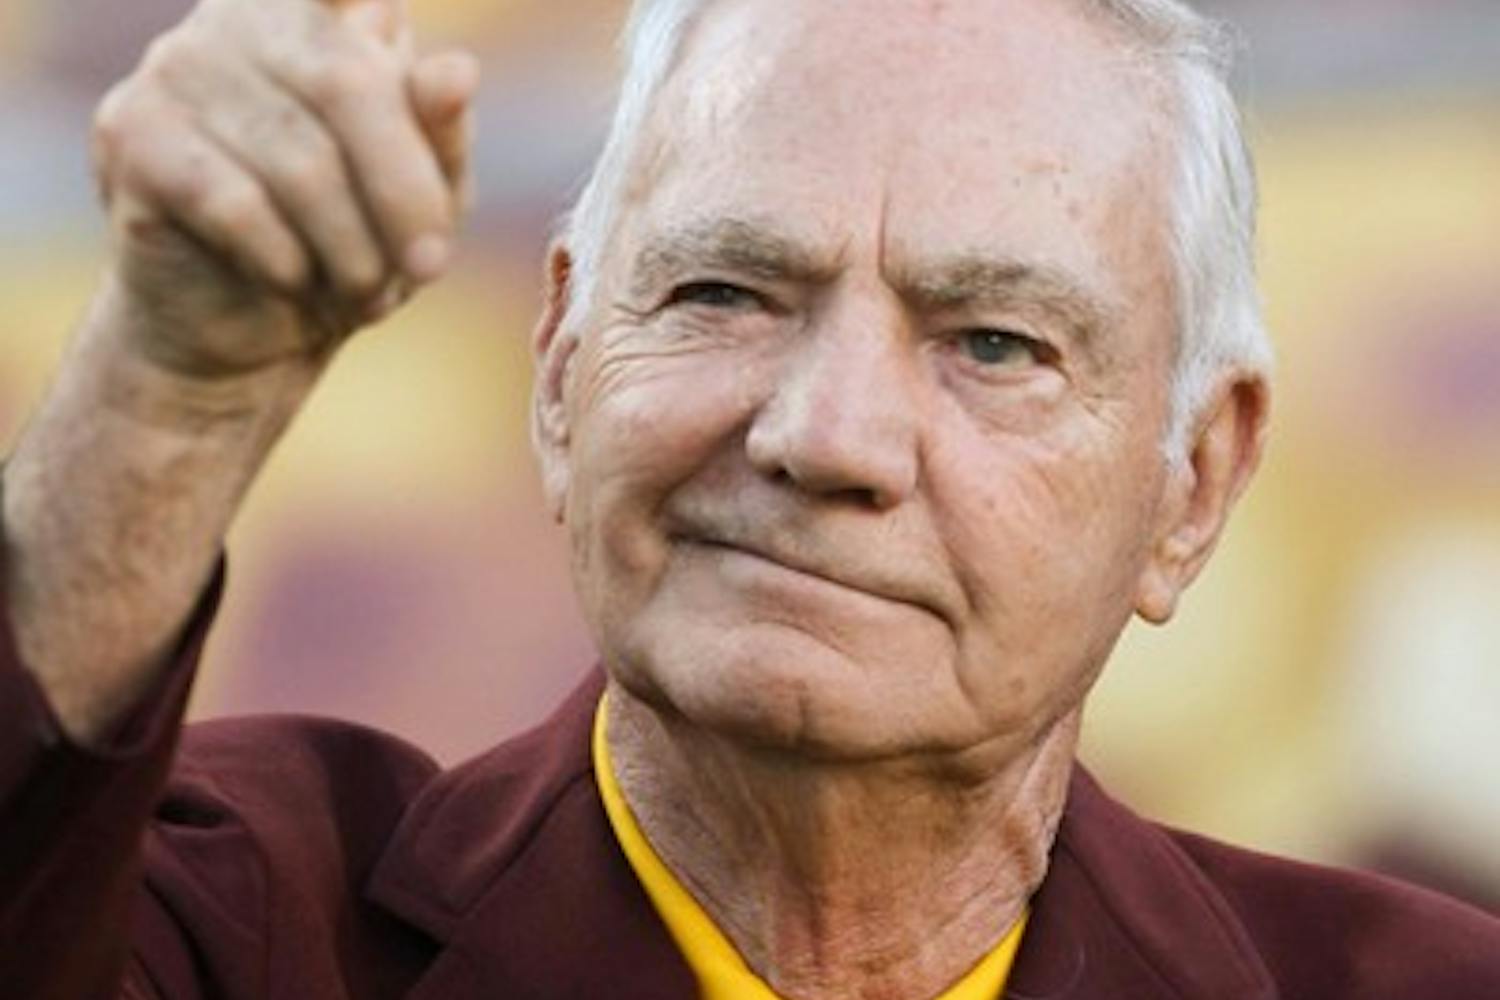 DUE CREDIT: Former ASU football coach Frank Kush points to the crowd before receiving the Lott IMPACT Award during halftime of the ASU-Colorado football game on Saturday. Kush was recognized with the lifetime achievement award for his success as a coach and his influence among his associates. (Photo by Lisa Bartoli)